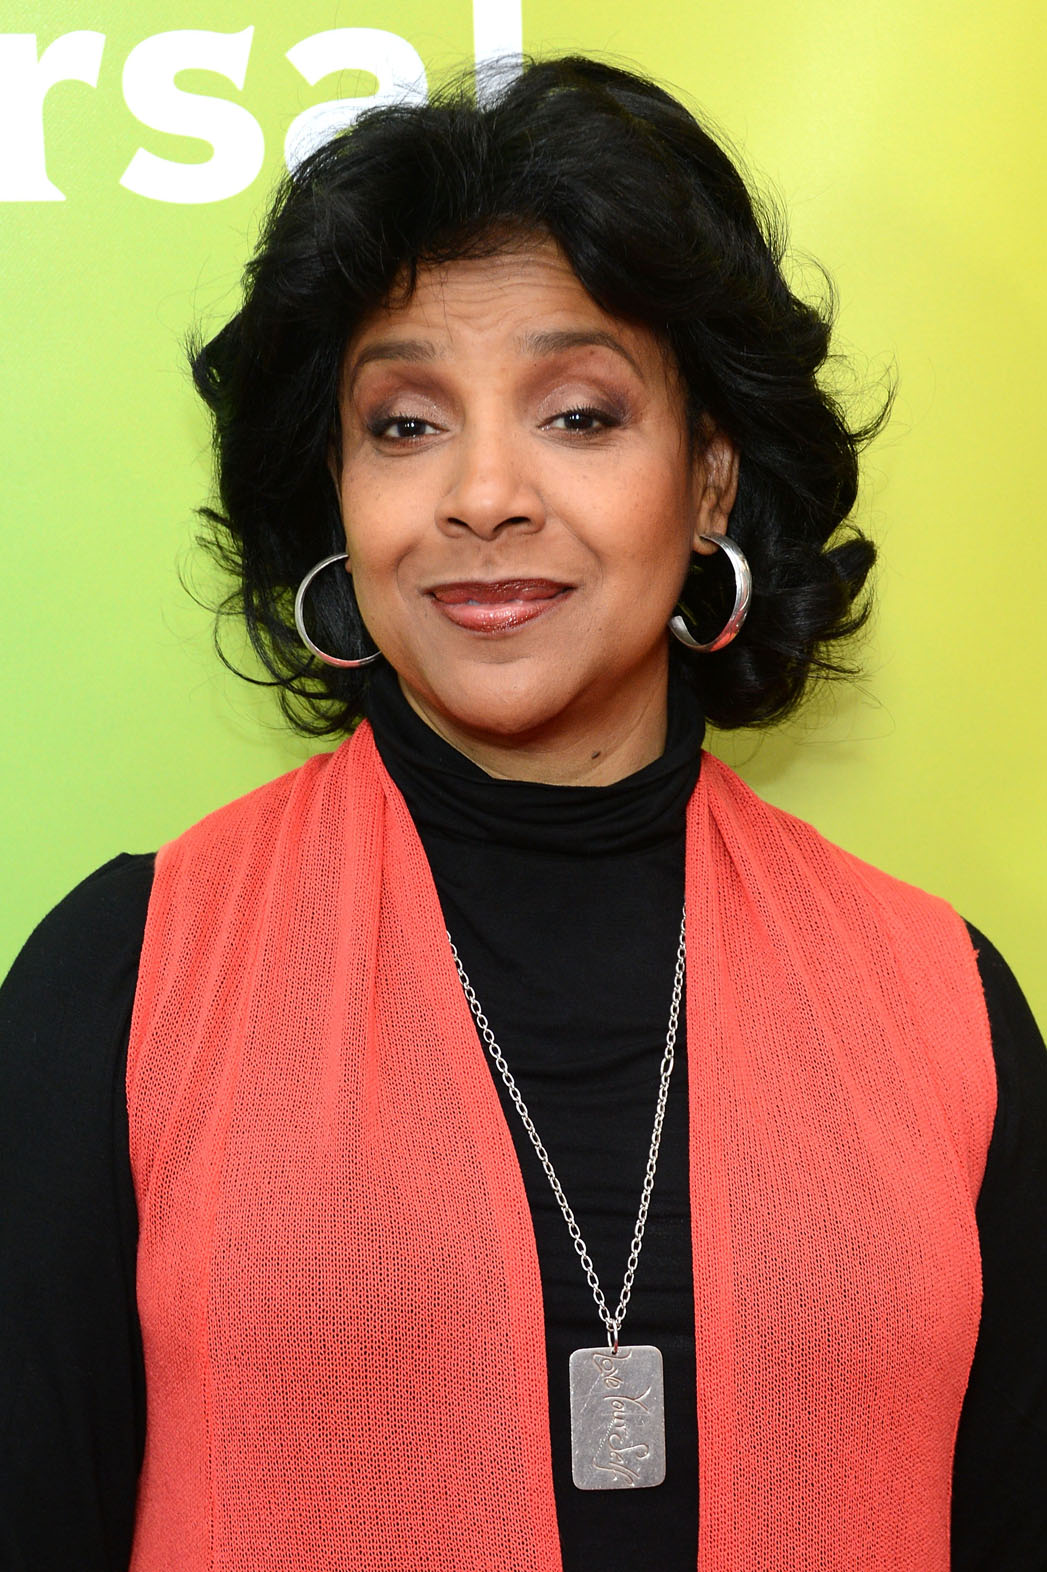 More Pictures Of Phylicia Rashad. best pictures of phylicia rashad. 